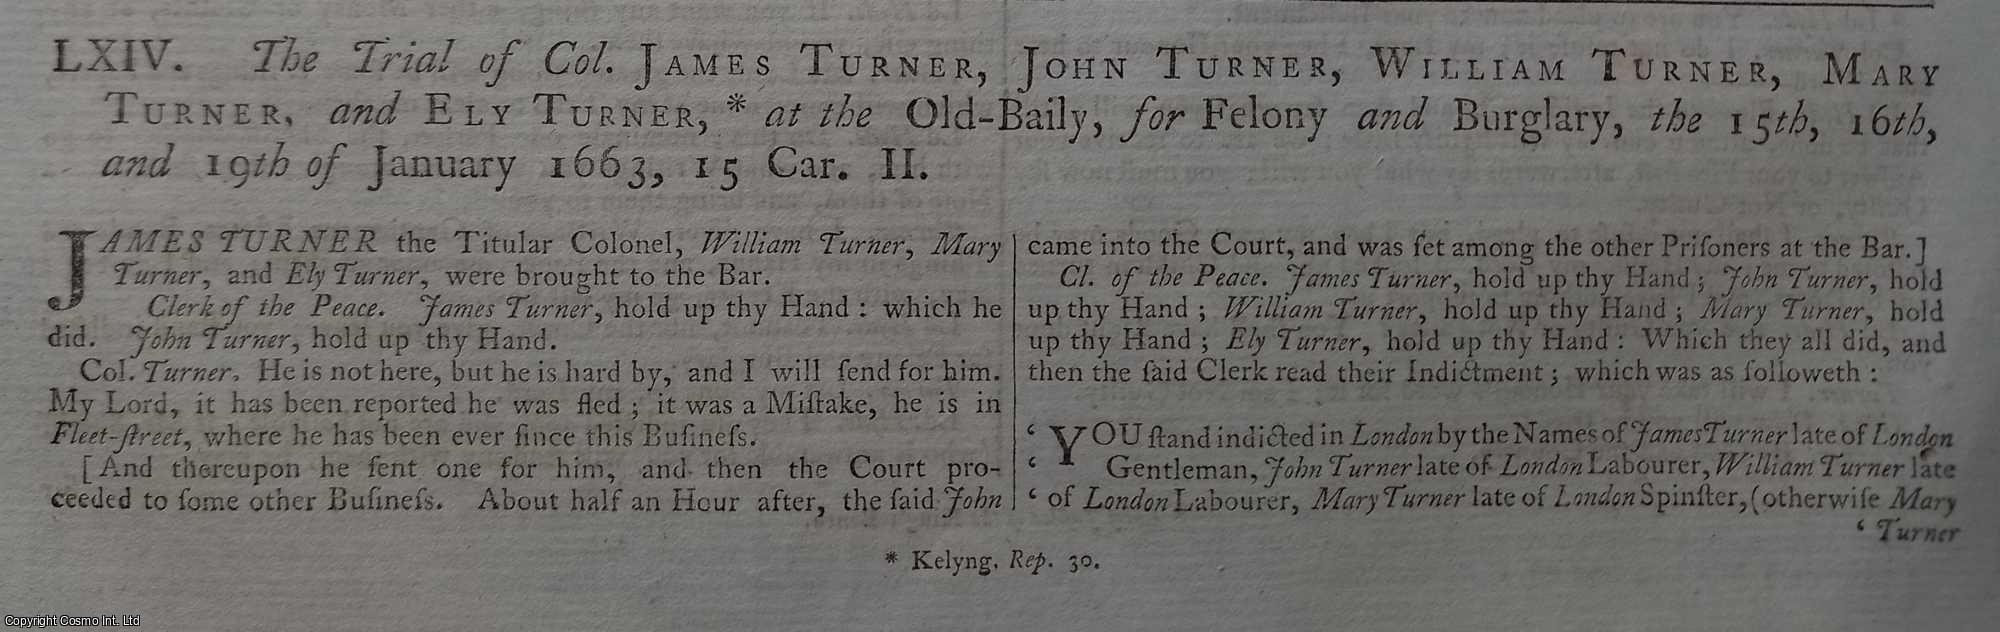 [Trial] - The Trial of Colonel James Turner, John Turner, William Turner, Mary Turner and Ely Turner, at The Old Bailey, For Felony and Burglary, 1663. An original article from the Collected State Trials.